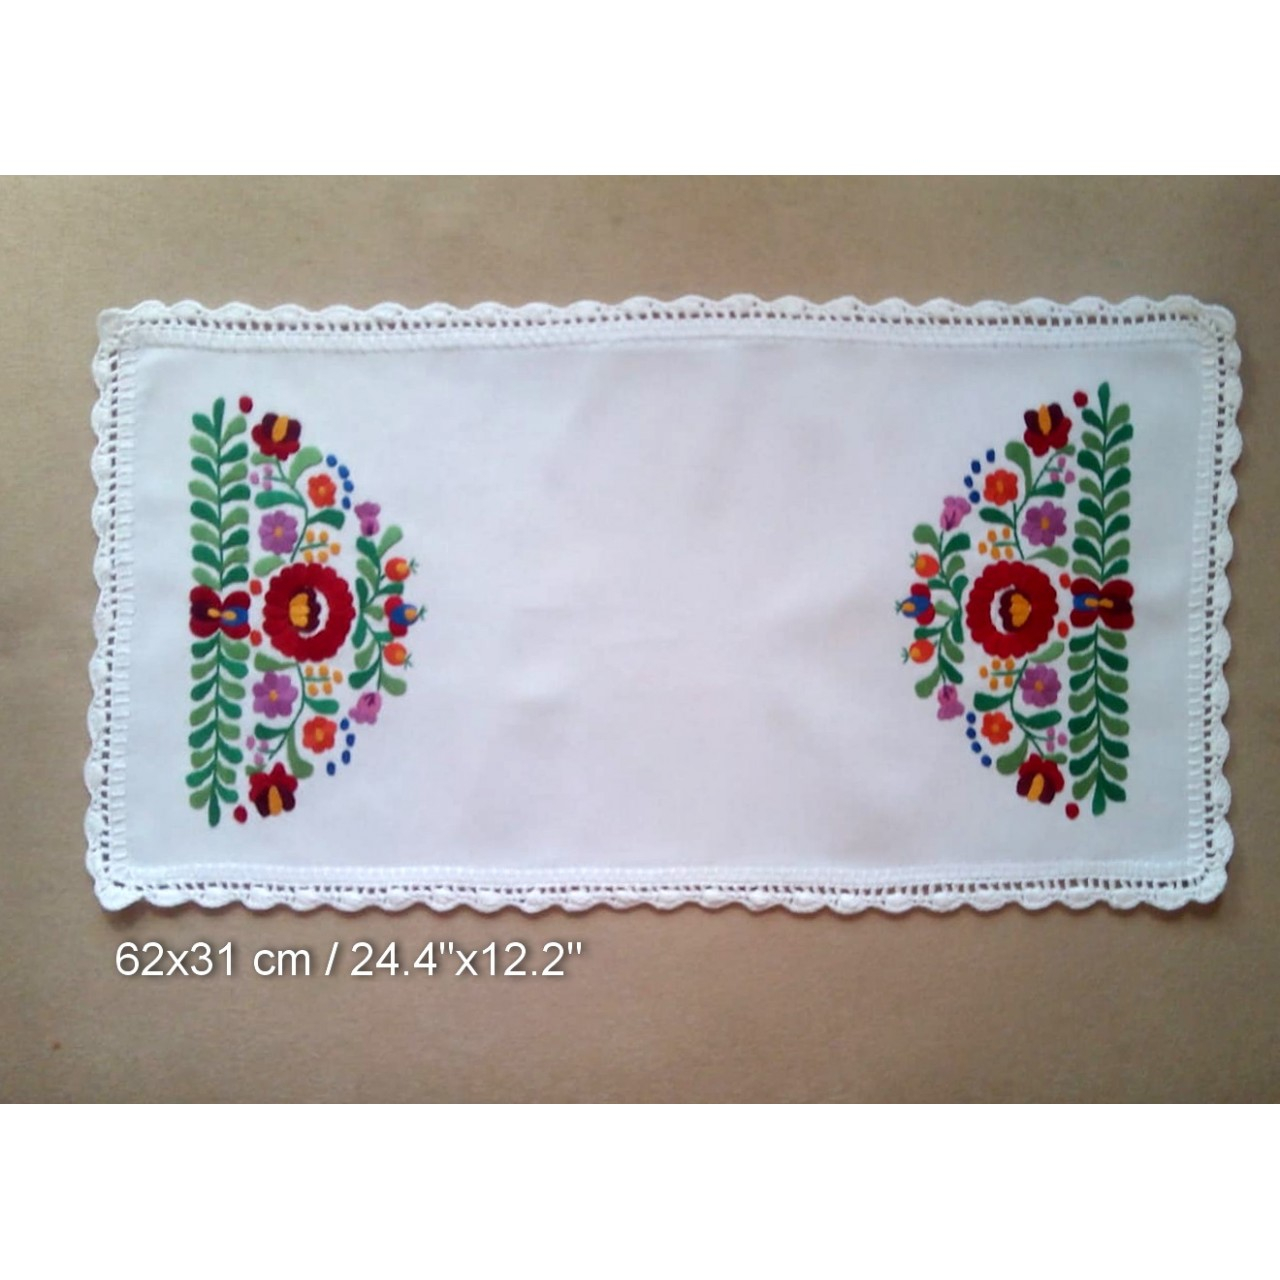 Hand Embroidery Patterns For Tablecloth Tablecloth With Crocheted Edge Matyo Floral Motives Table Mk Smtr